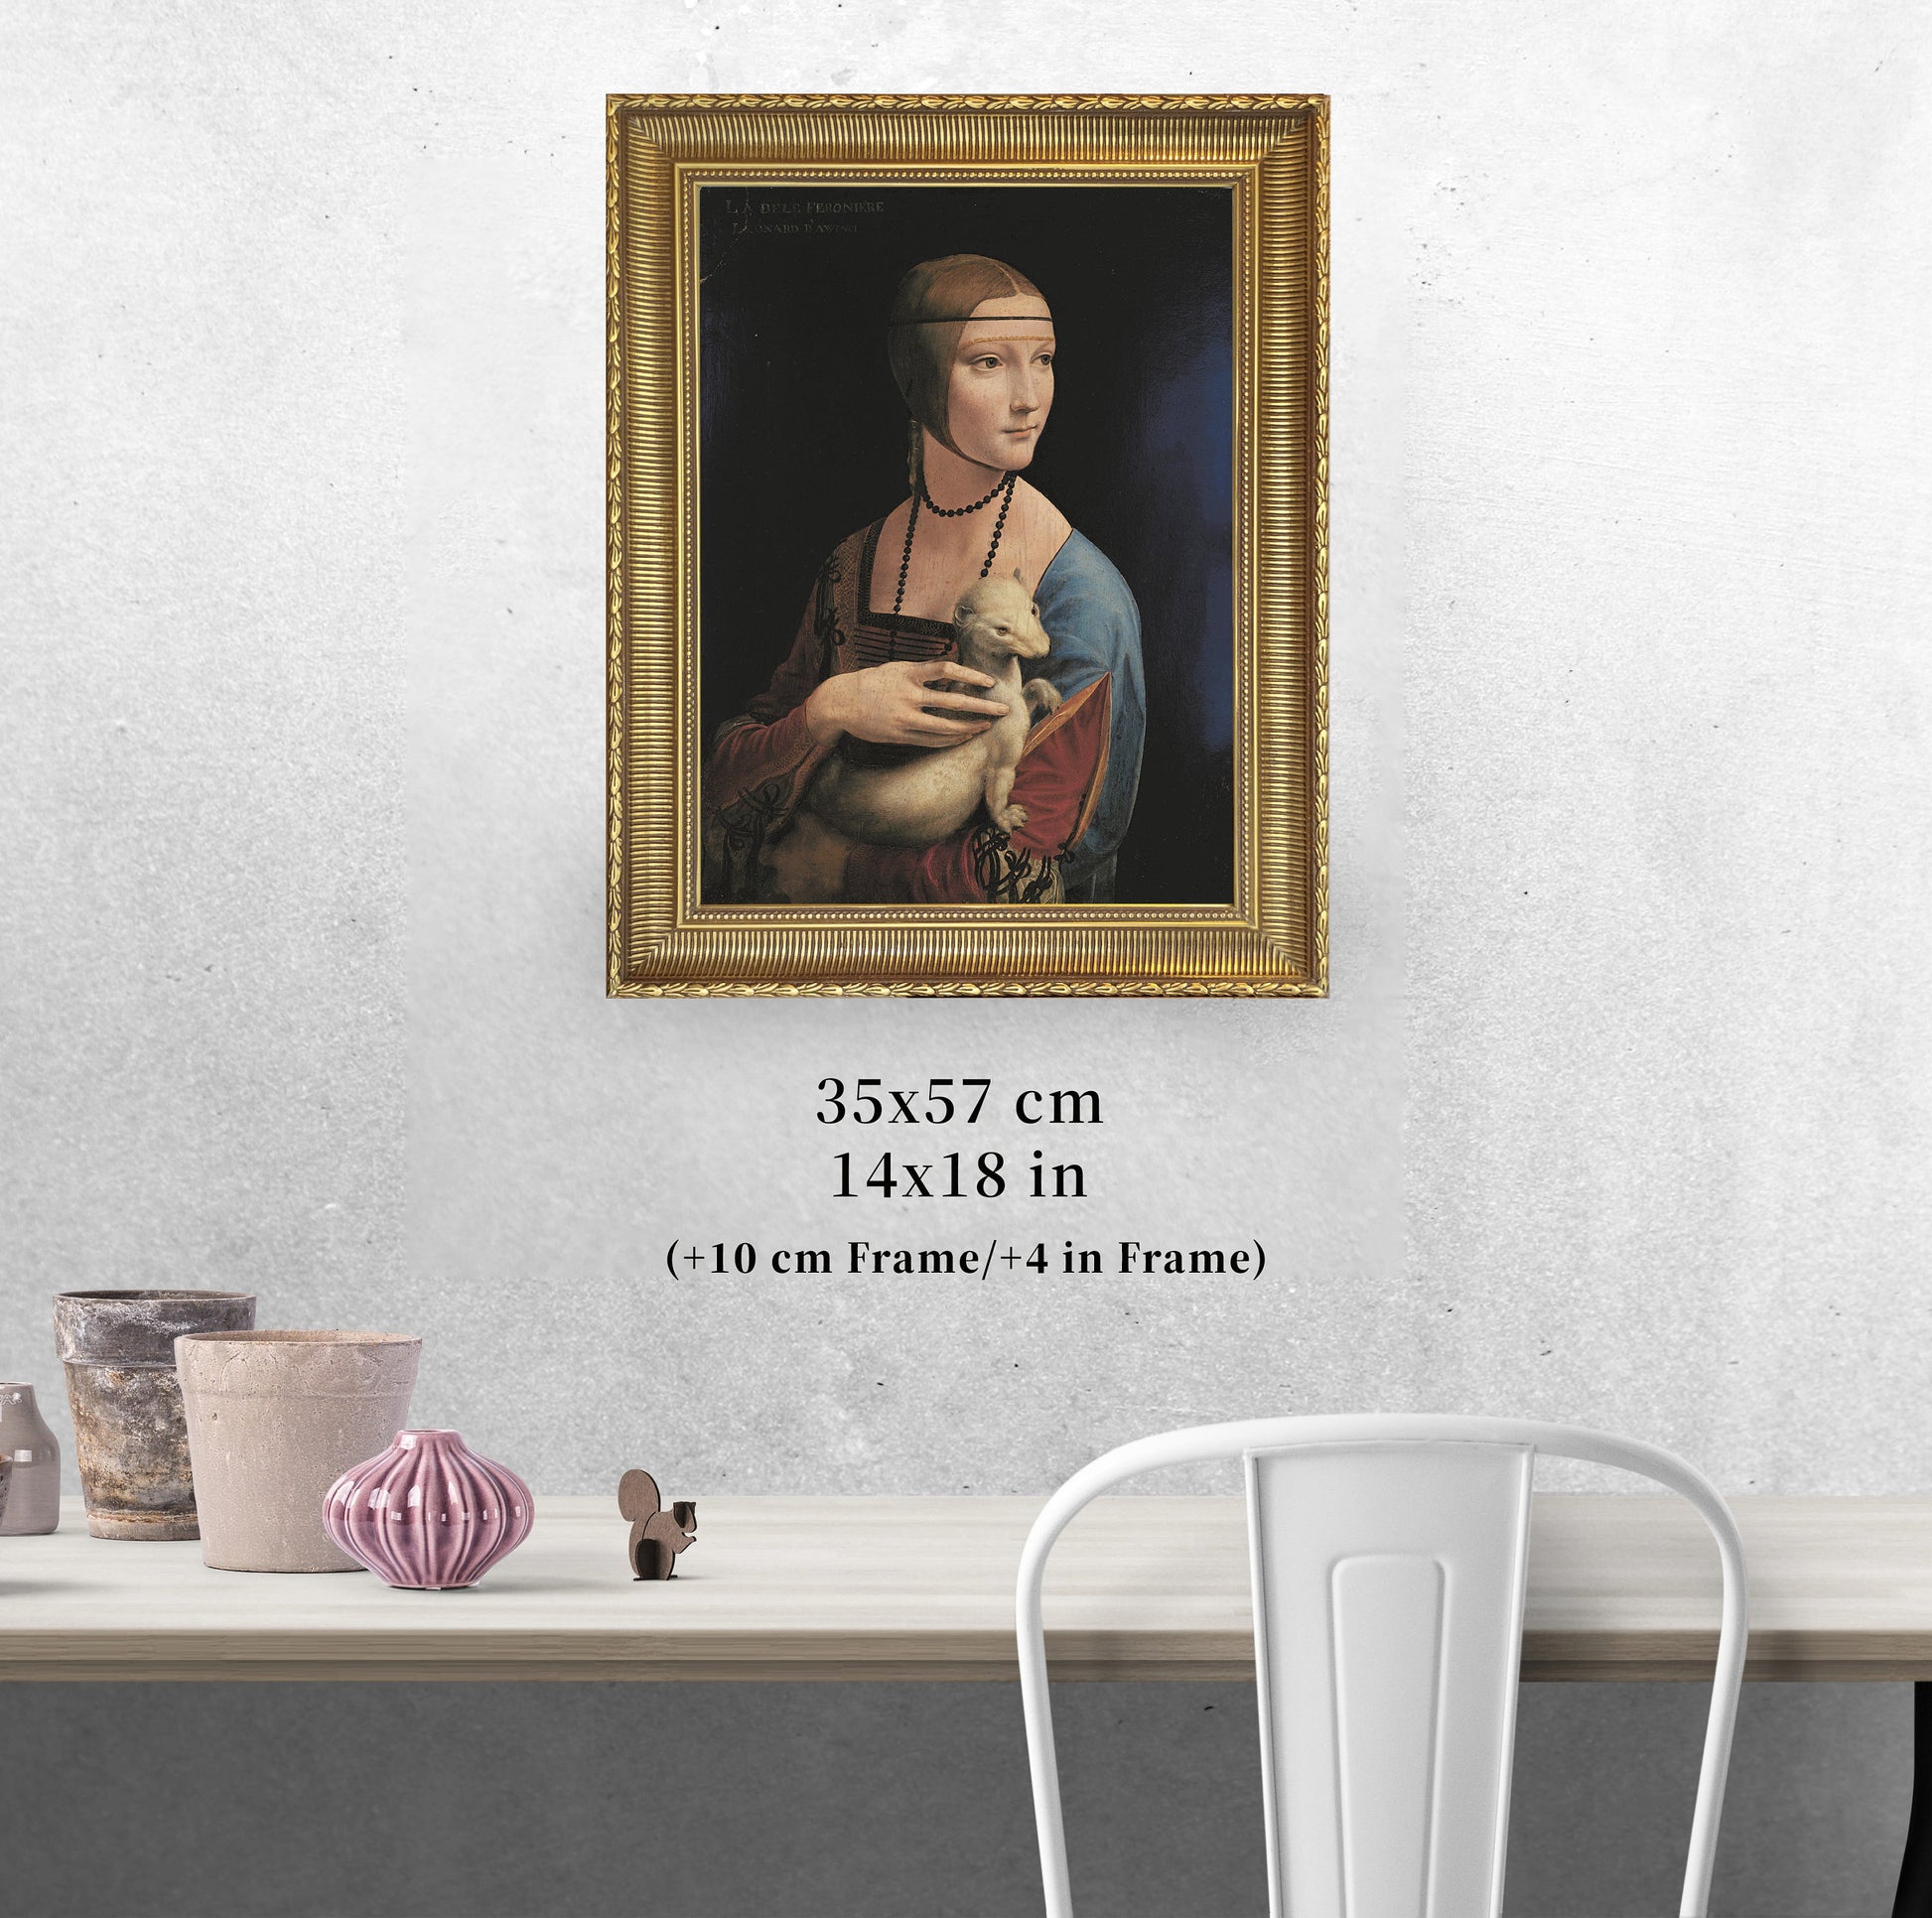 Lady with an Ermine by Leonardo Da Vinci, 3d Printed with texture and brush strokes looks like original oil-painting, code:046